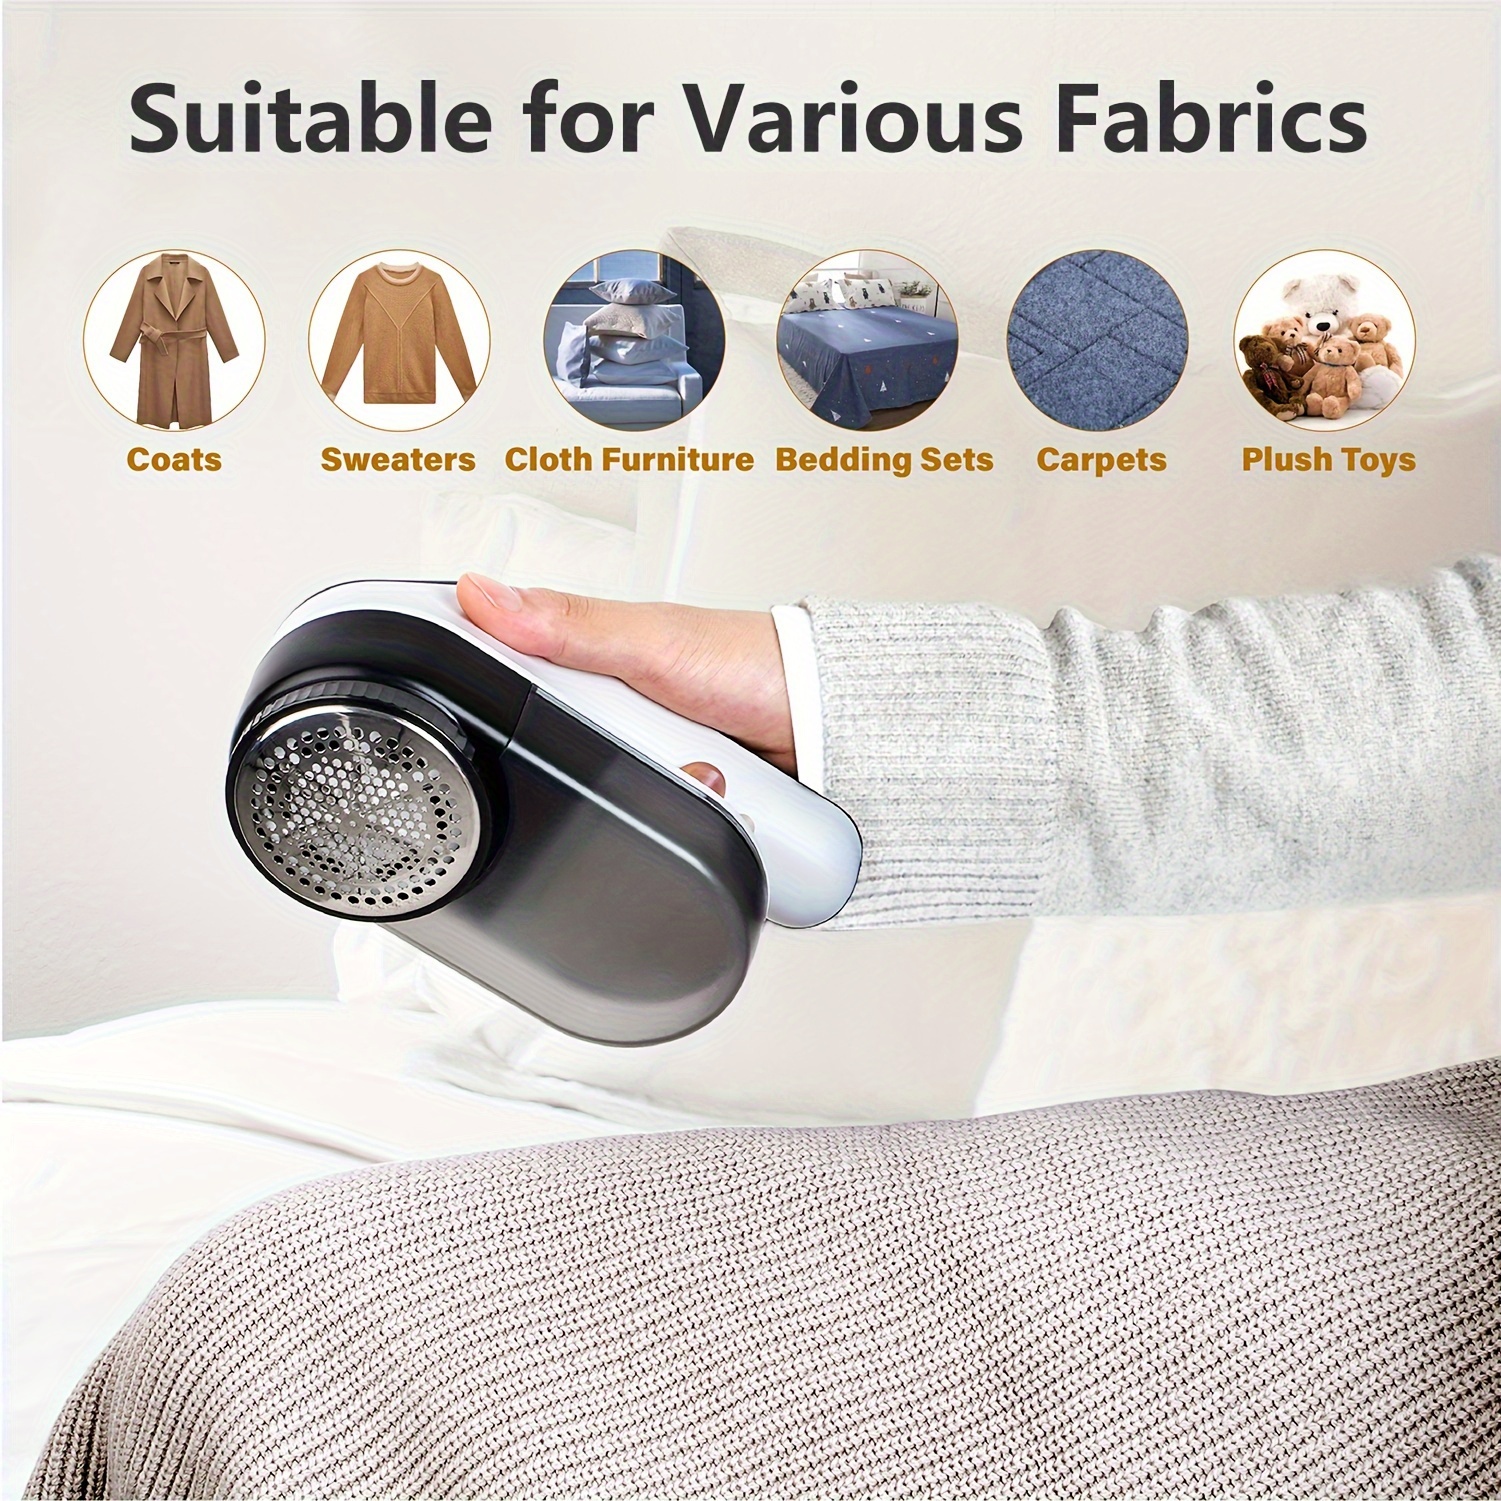 Cordless Electric Fabric Shaver, Lint Remover Shaver for Clothes, USB  Rechargeable Sweater Shaver Defuzzer with 2 Spare Blades